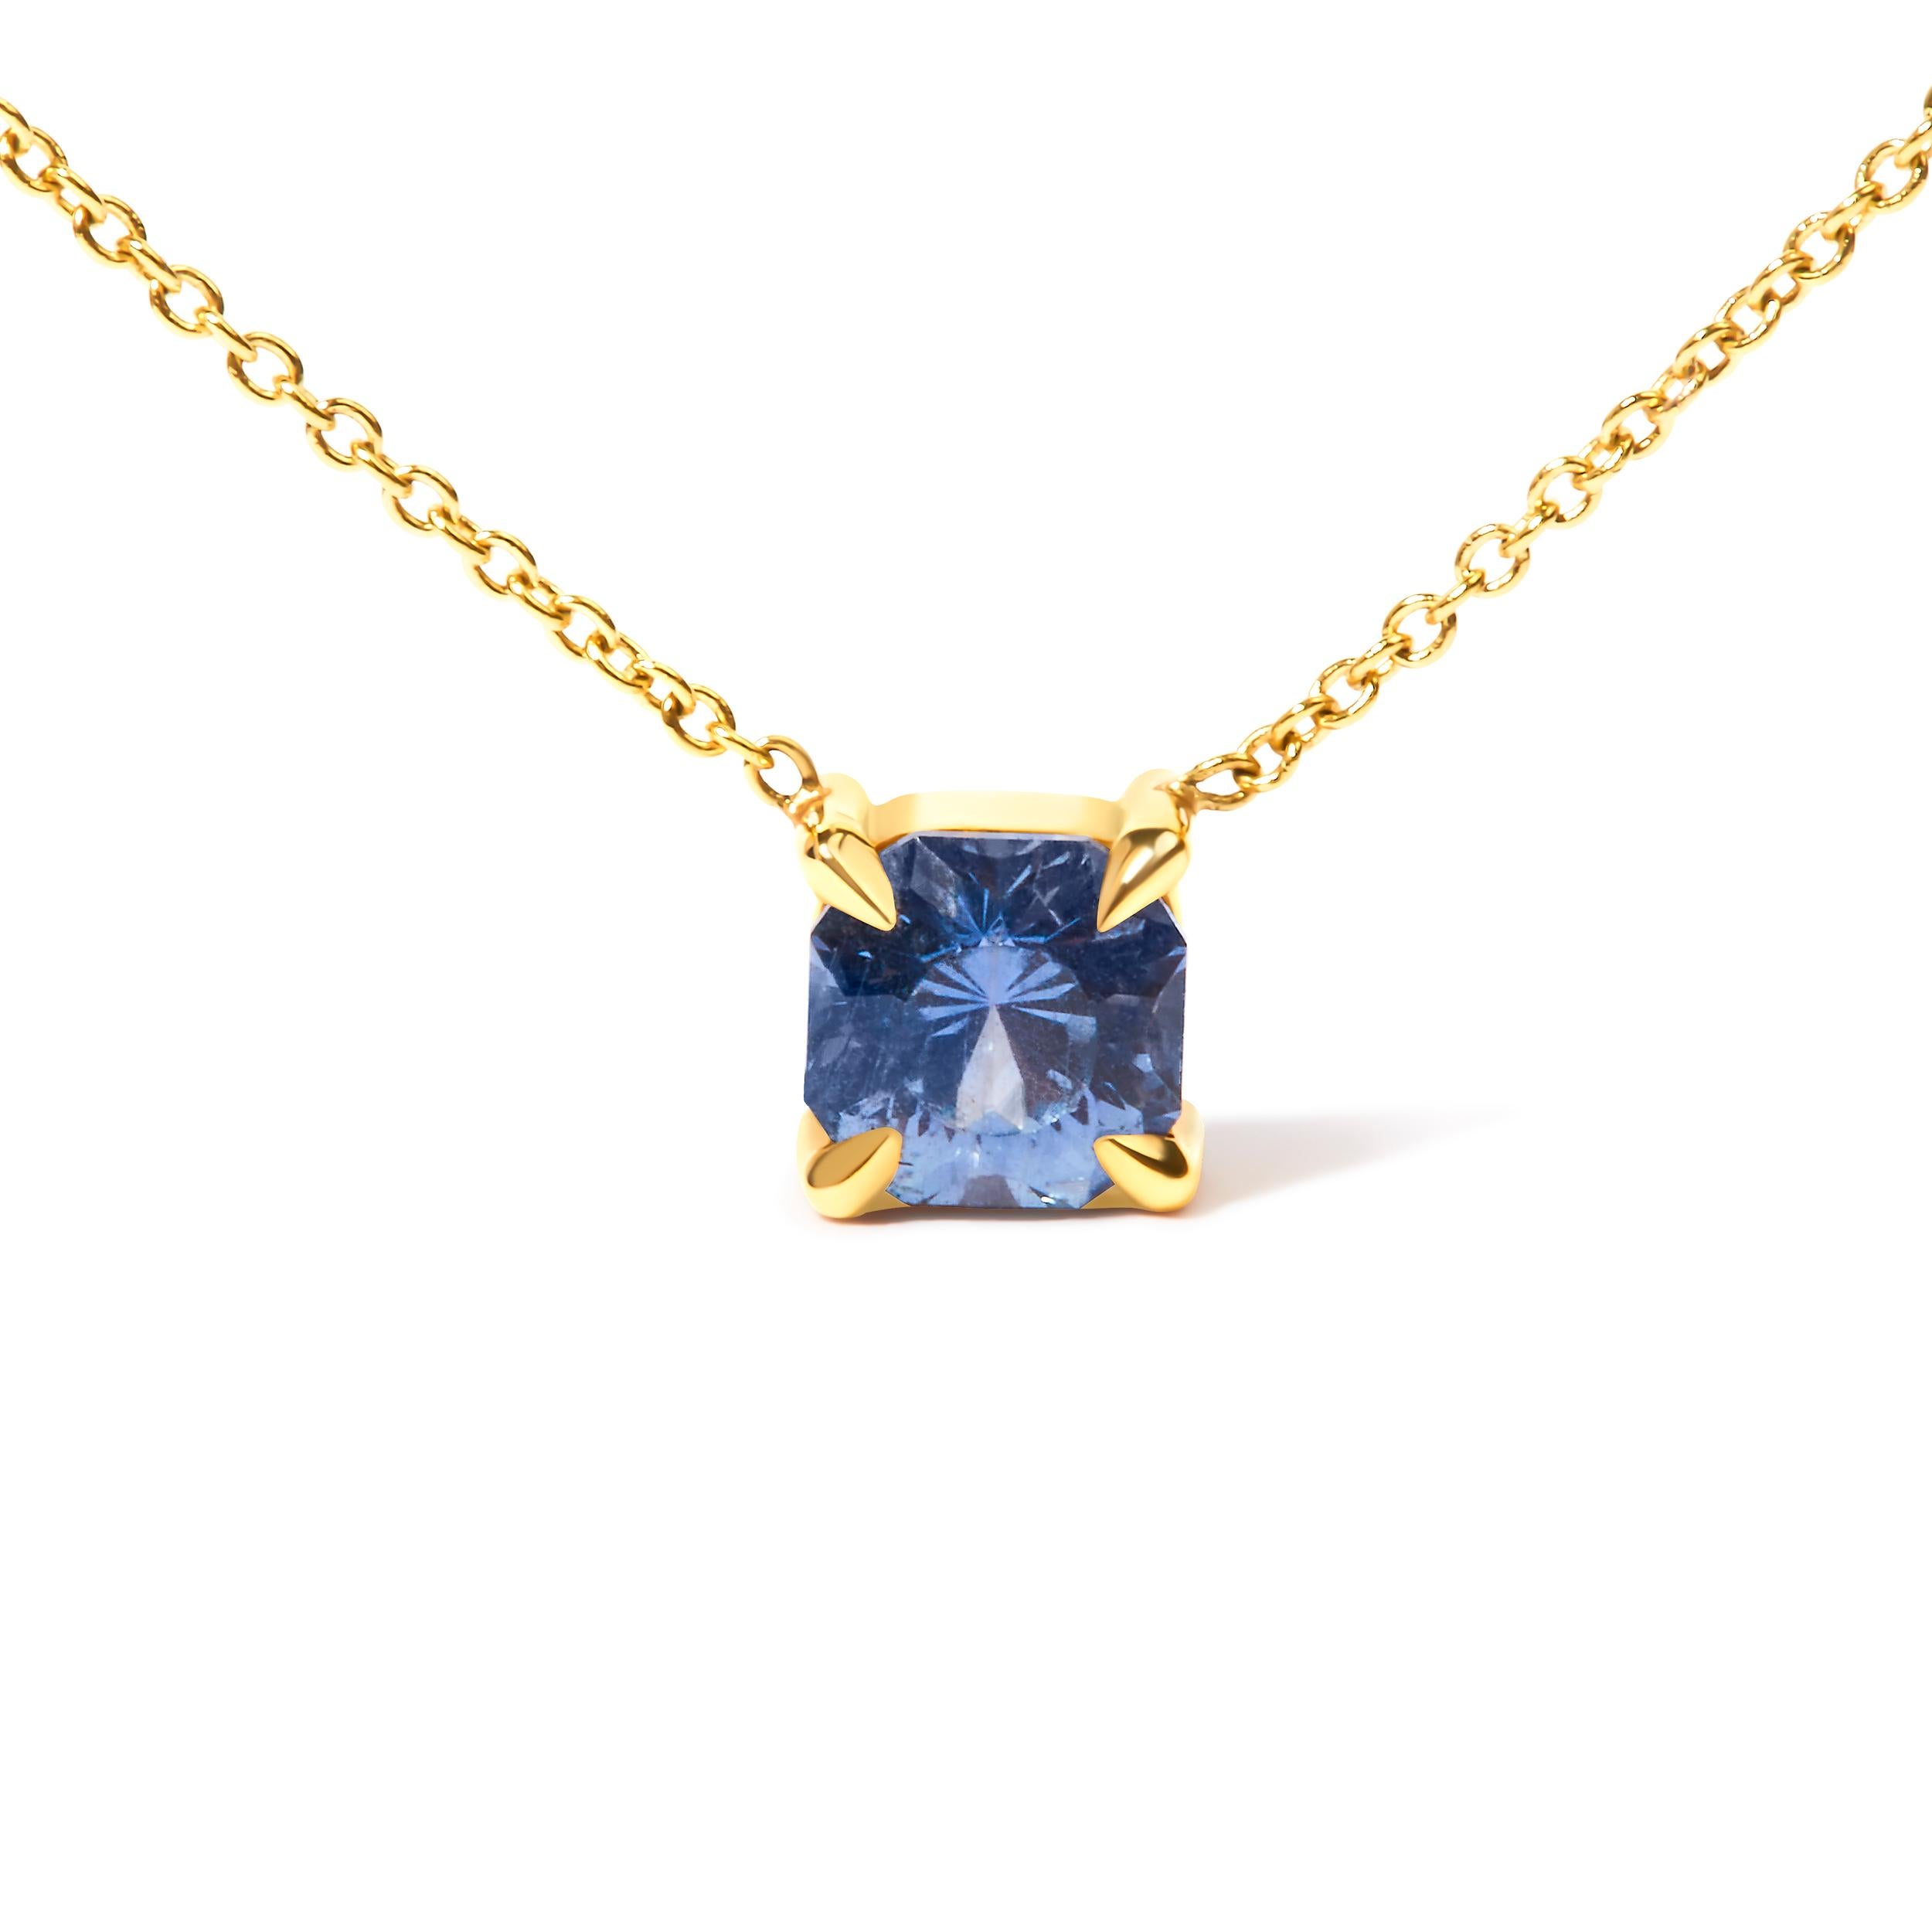 Immerse yourself in the enchanting allure of our 14K Yellow Gold 4/5 Cttw Natural Cushion Cut Blue Sapphire Solitaire Pendant Necklace. Crafted with exquisite craftsmanship and attention to detail, this necklace features a dazzling 4.8 x 4.8 mm